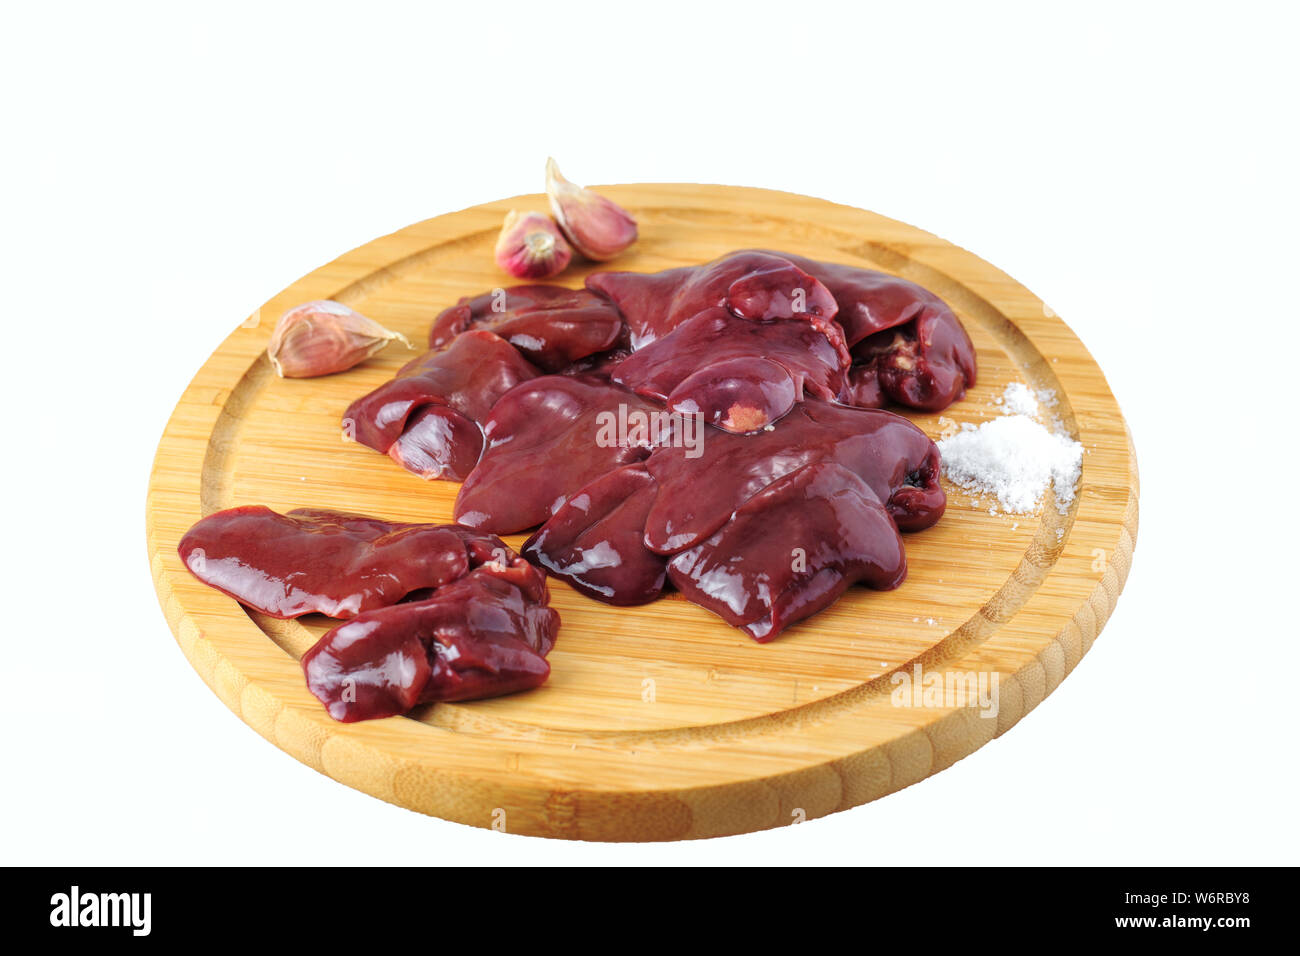 chicken liver on a wooden board on a white background Stock Photo